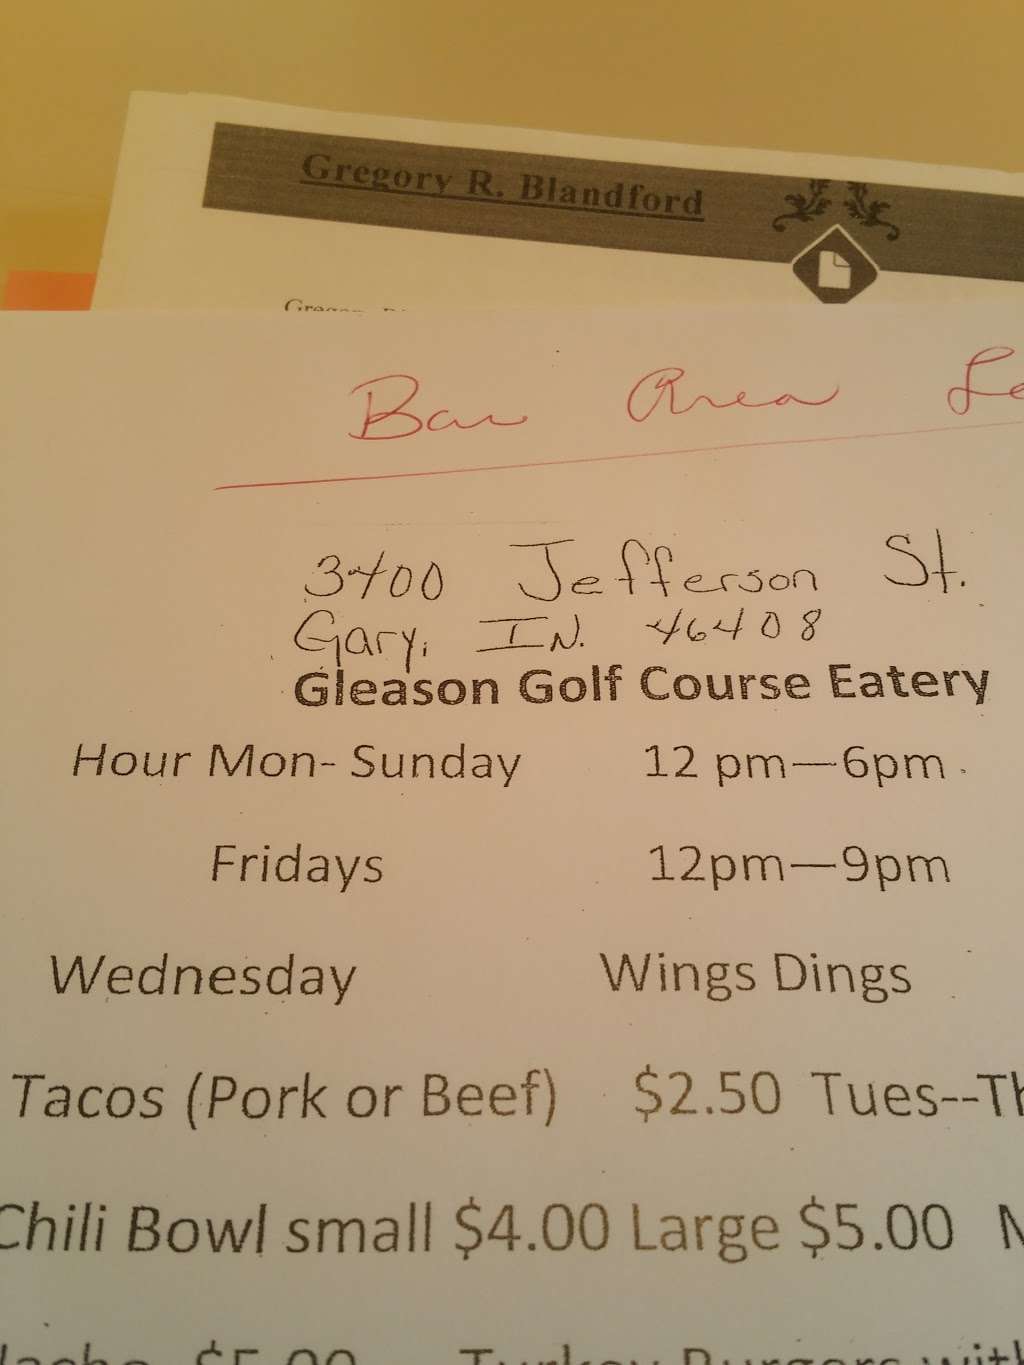 Gleason Golf Course Eatery | 3338-3498 Jefferson St, Gary, IN 46408 | Phone: (219) 887-8000